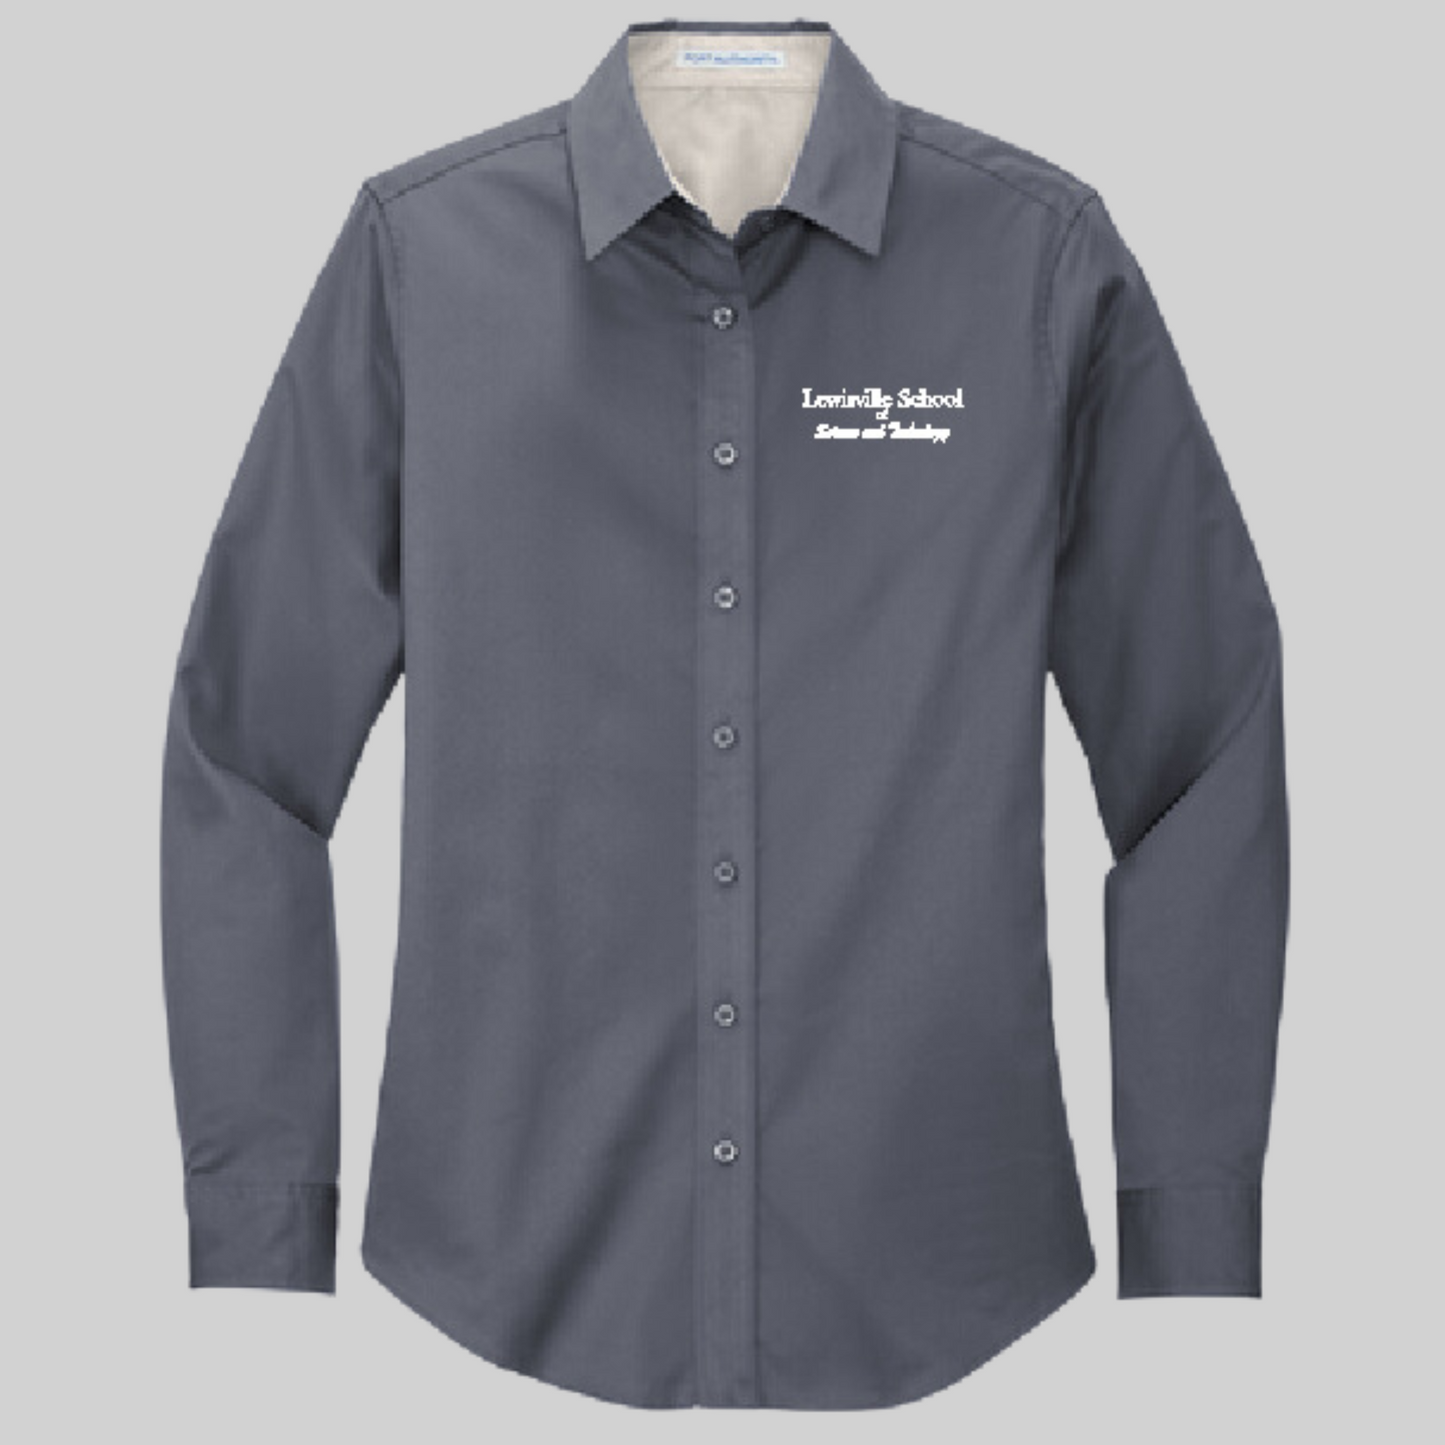 iSchool (Lewisville School of Science and Technology) Long Sleeve Business Shirt